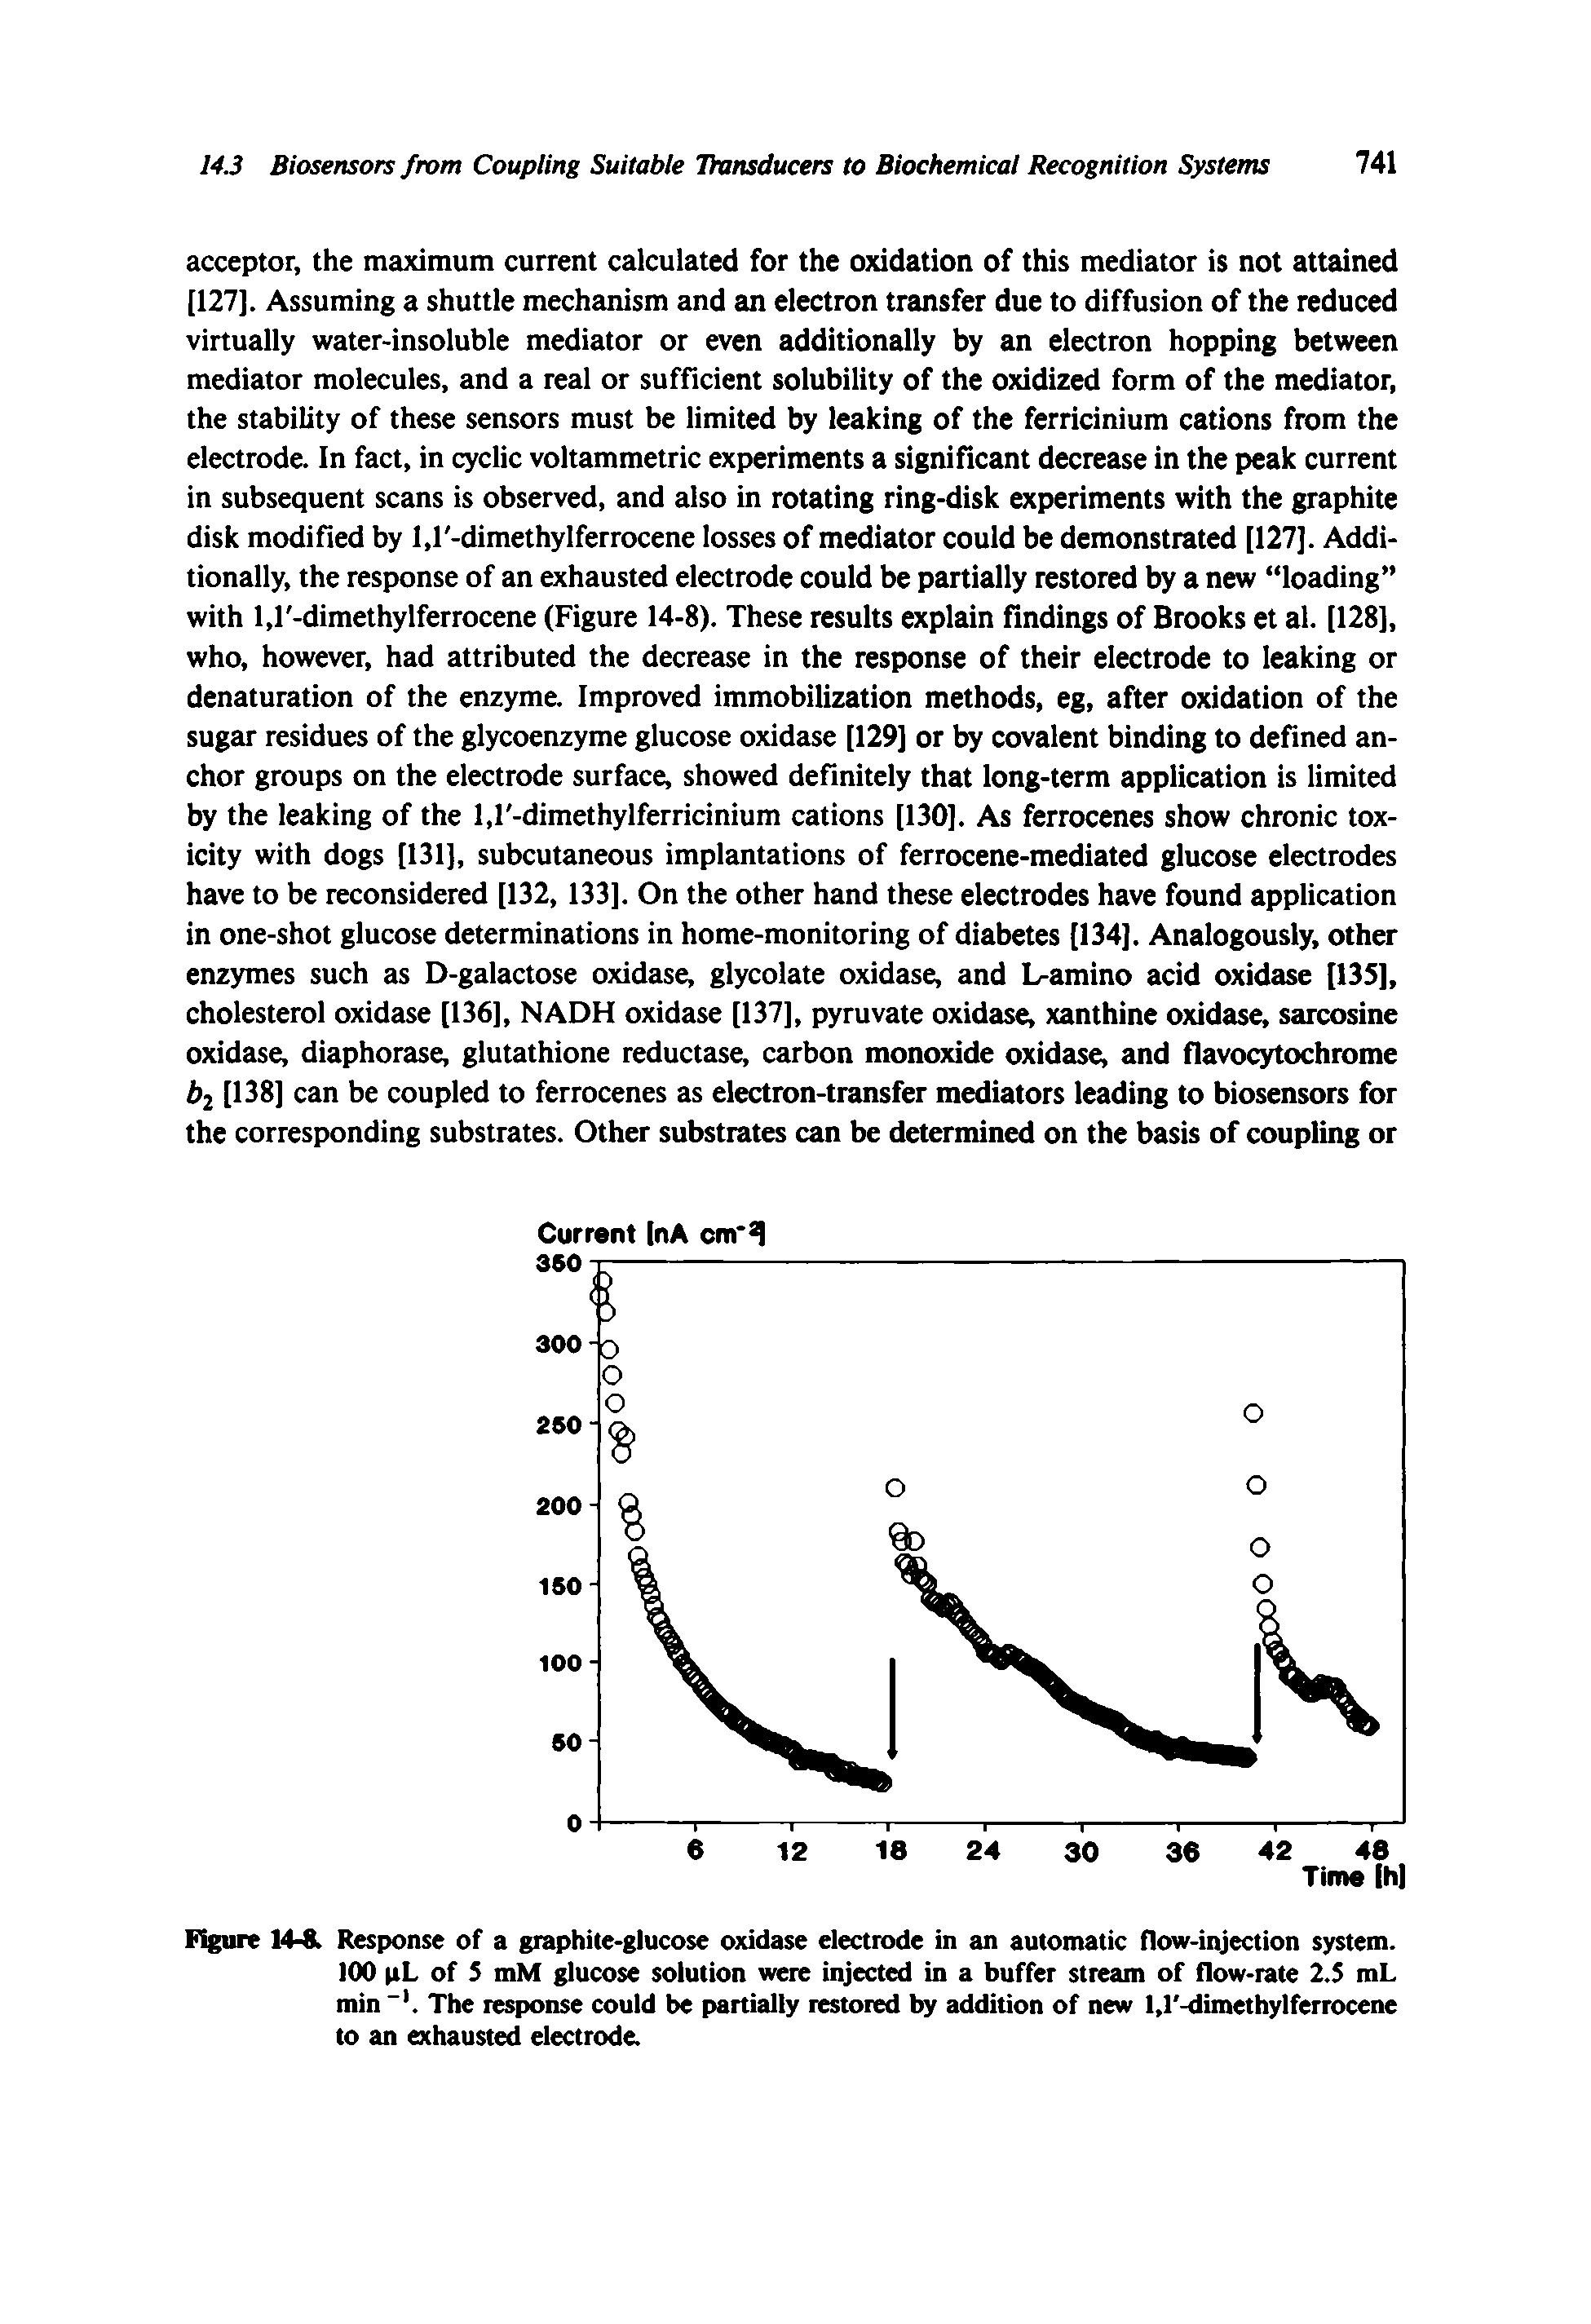 Figure 14-8. Response of a graphite-glucose oxidase electrode in an automatic flow-injection system.